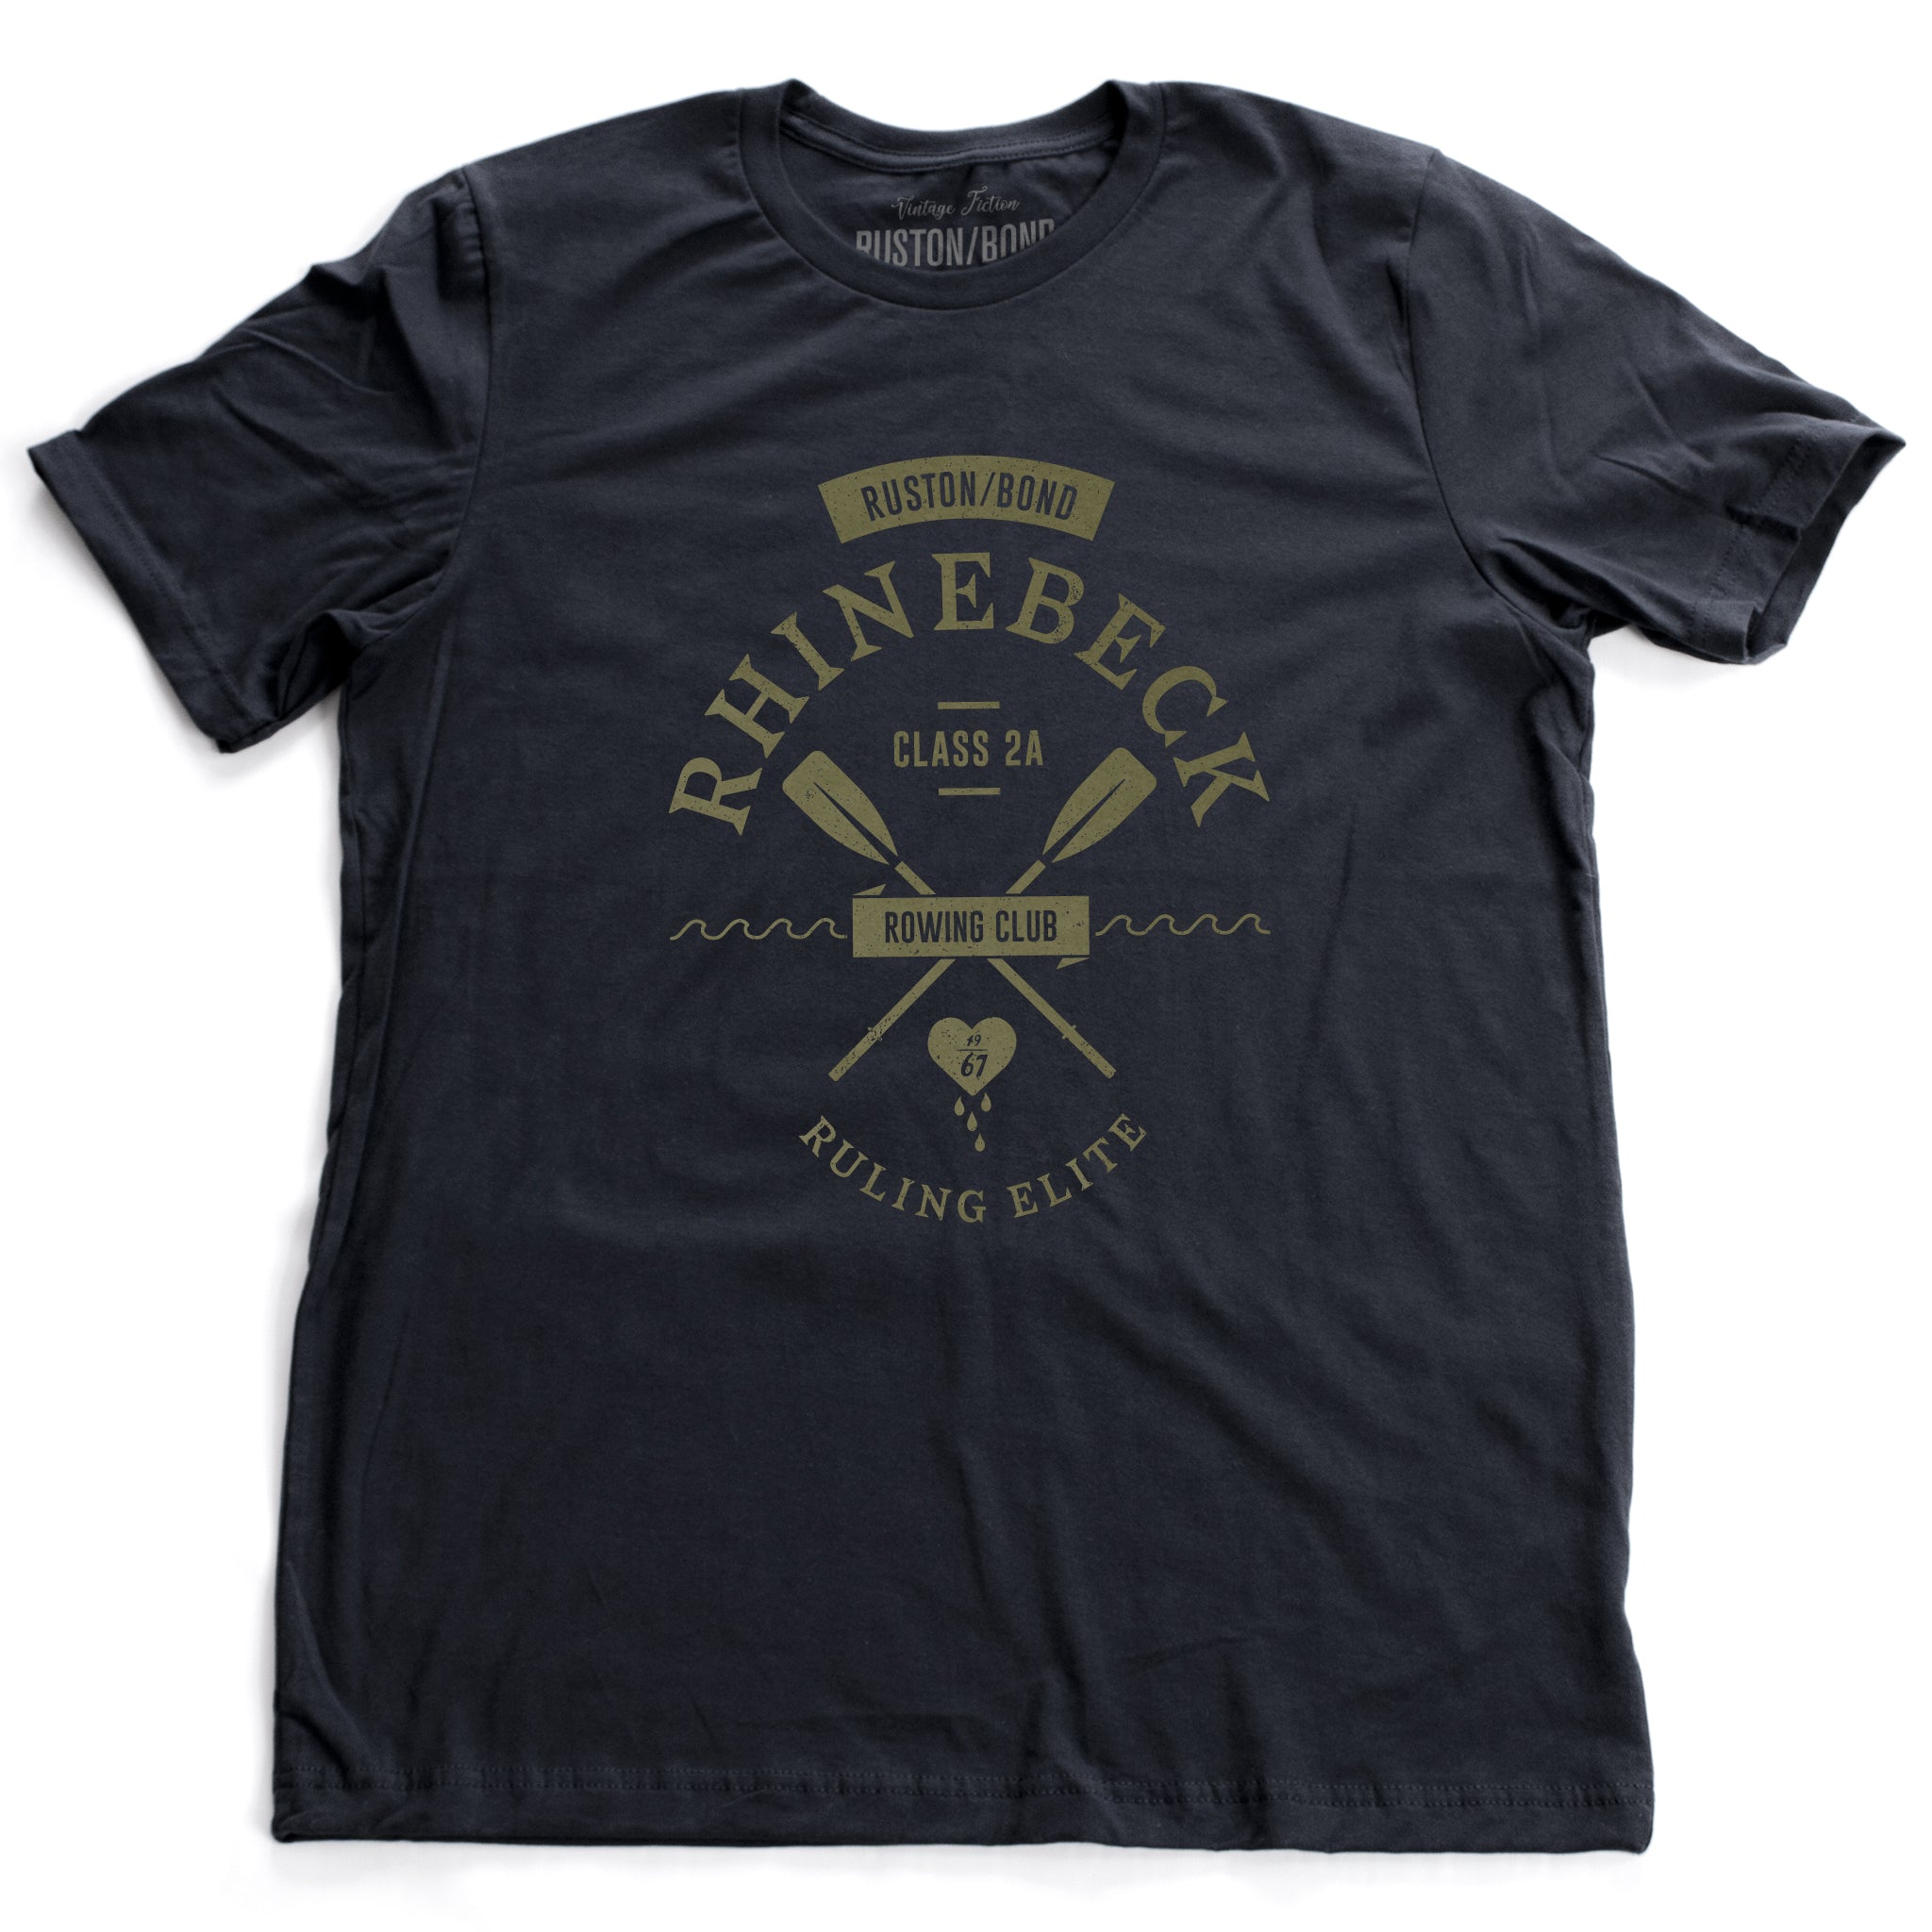 A preppy, vintage-look, retro graphic t-shirt, for a fictional Rhinebeck (New York) rowing club. It depicts two oars over waves, and the celebratory words “ruling elite” below a heart. In classic Navy Blue, by fashion brand Ruston/Bond, for a wolfsaint.net